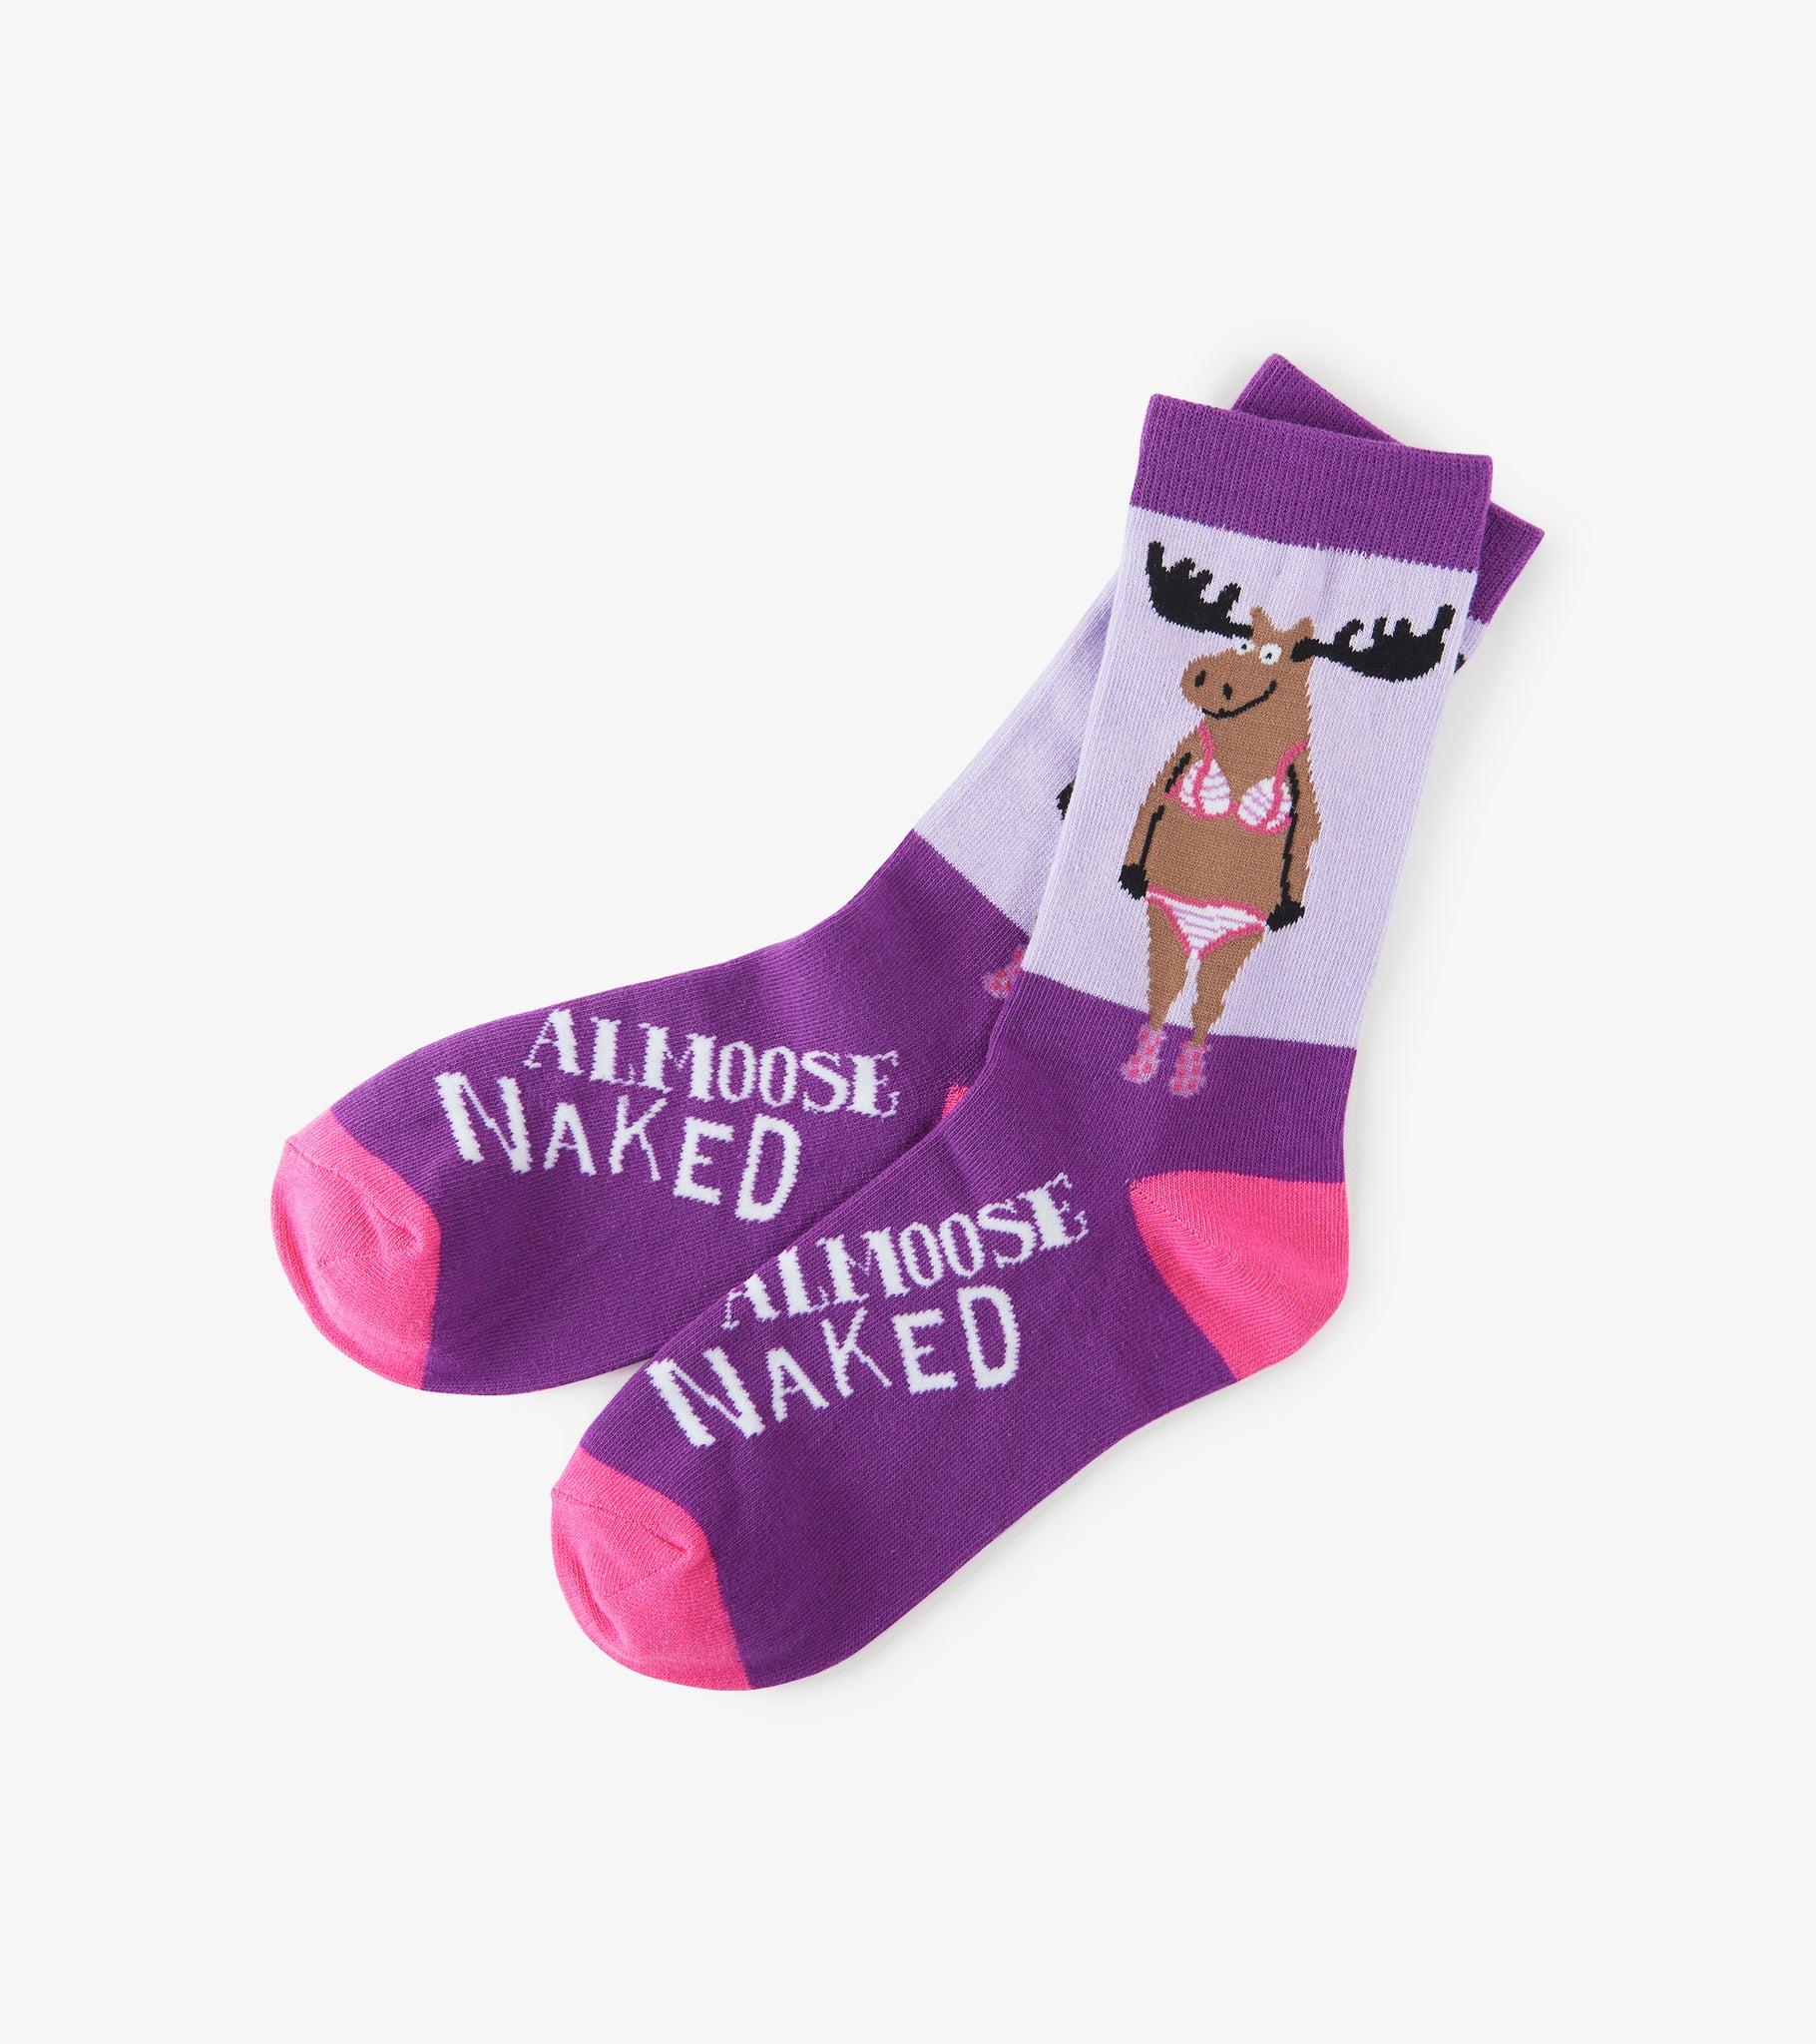 Chaussettes pour femme – Orignal « Almoose Naked »